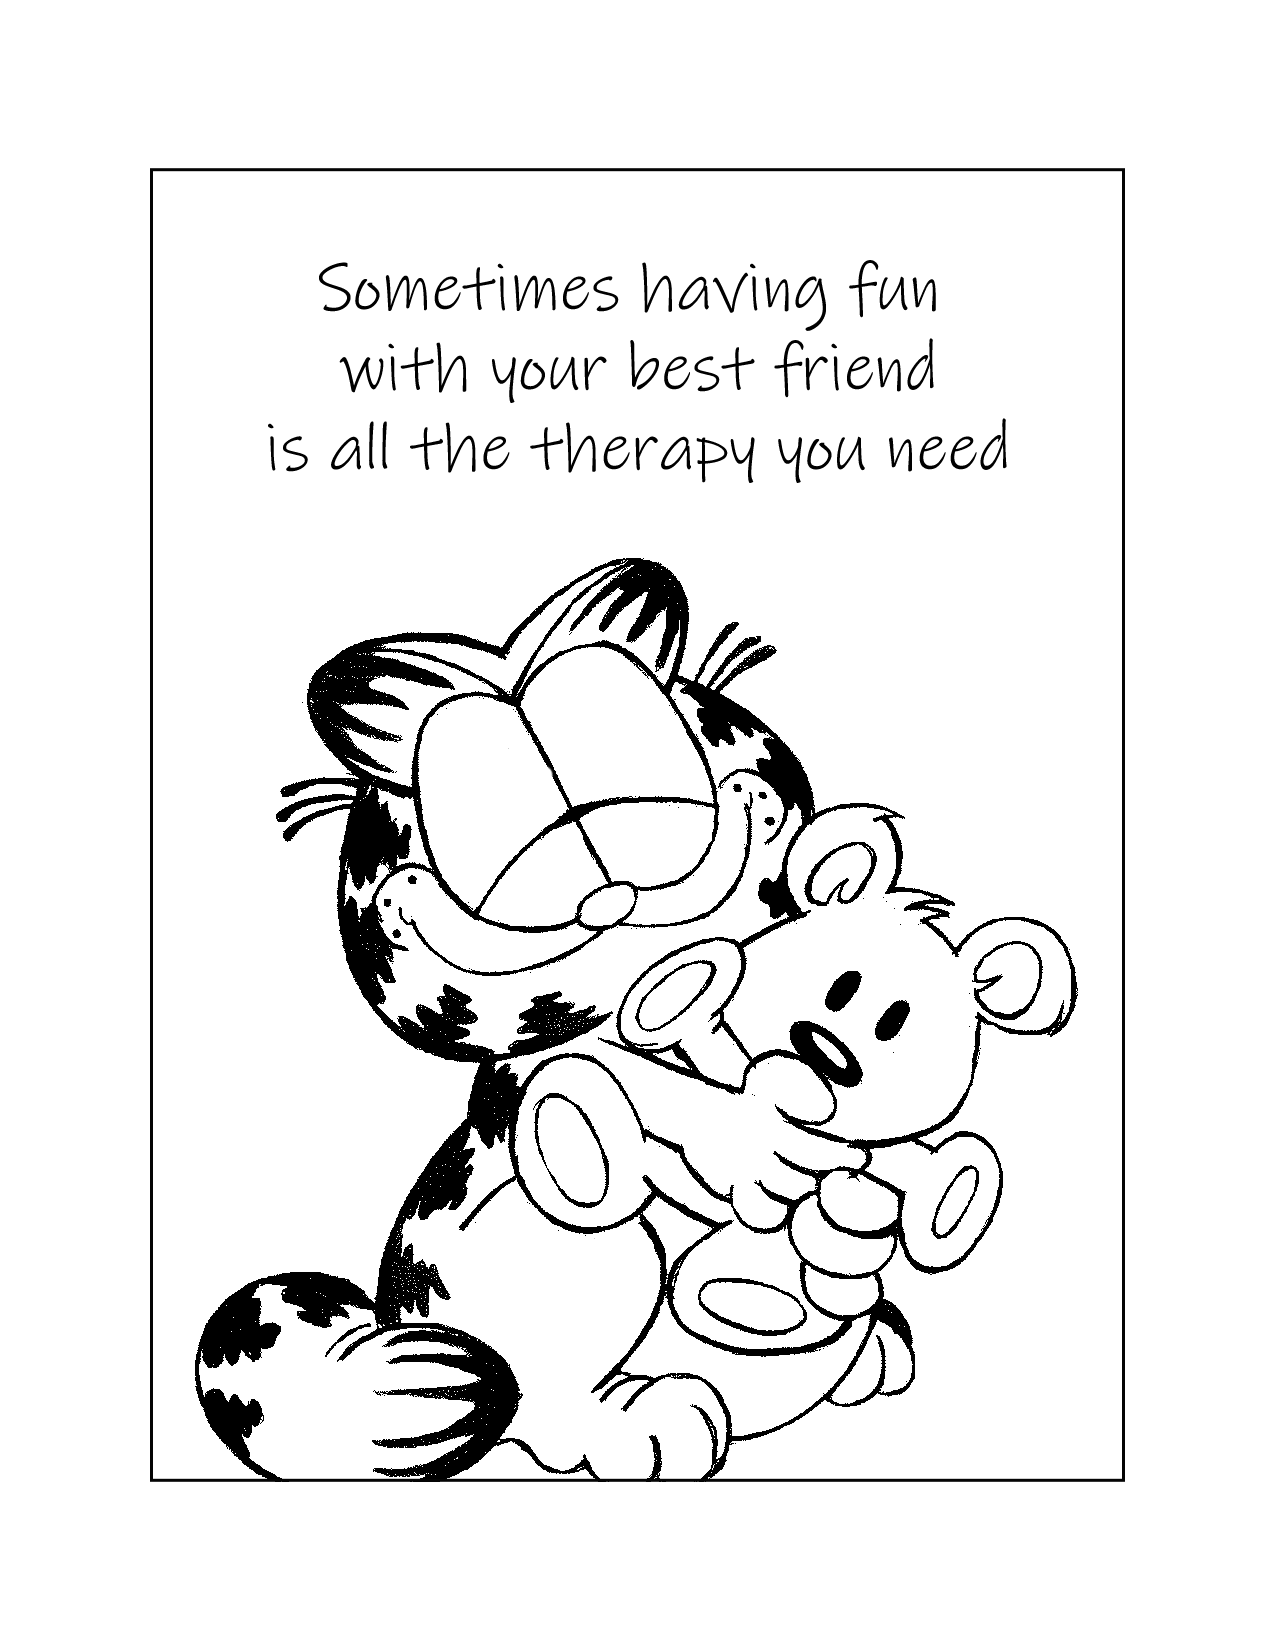 Garfield And Pooky Friendship Coloring Page